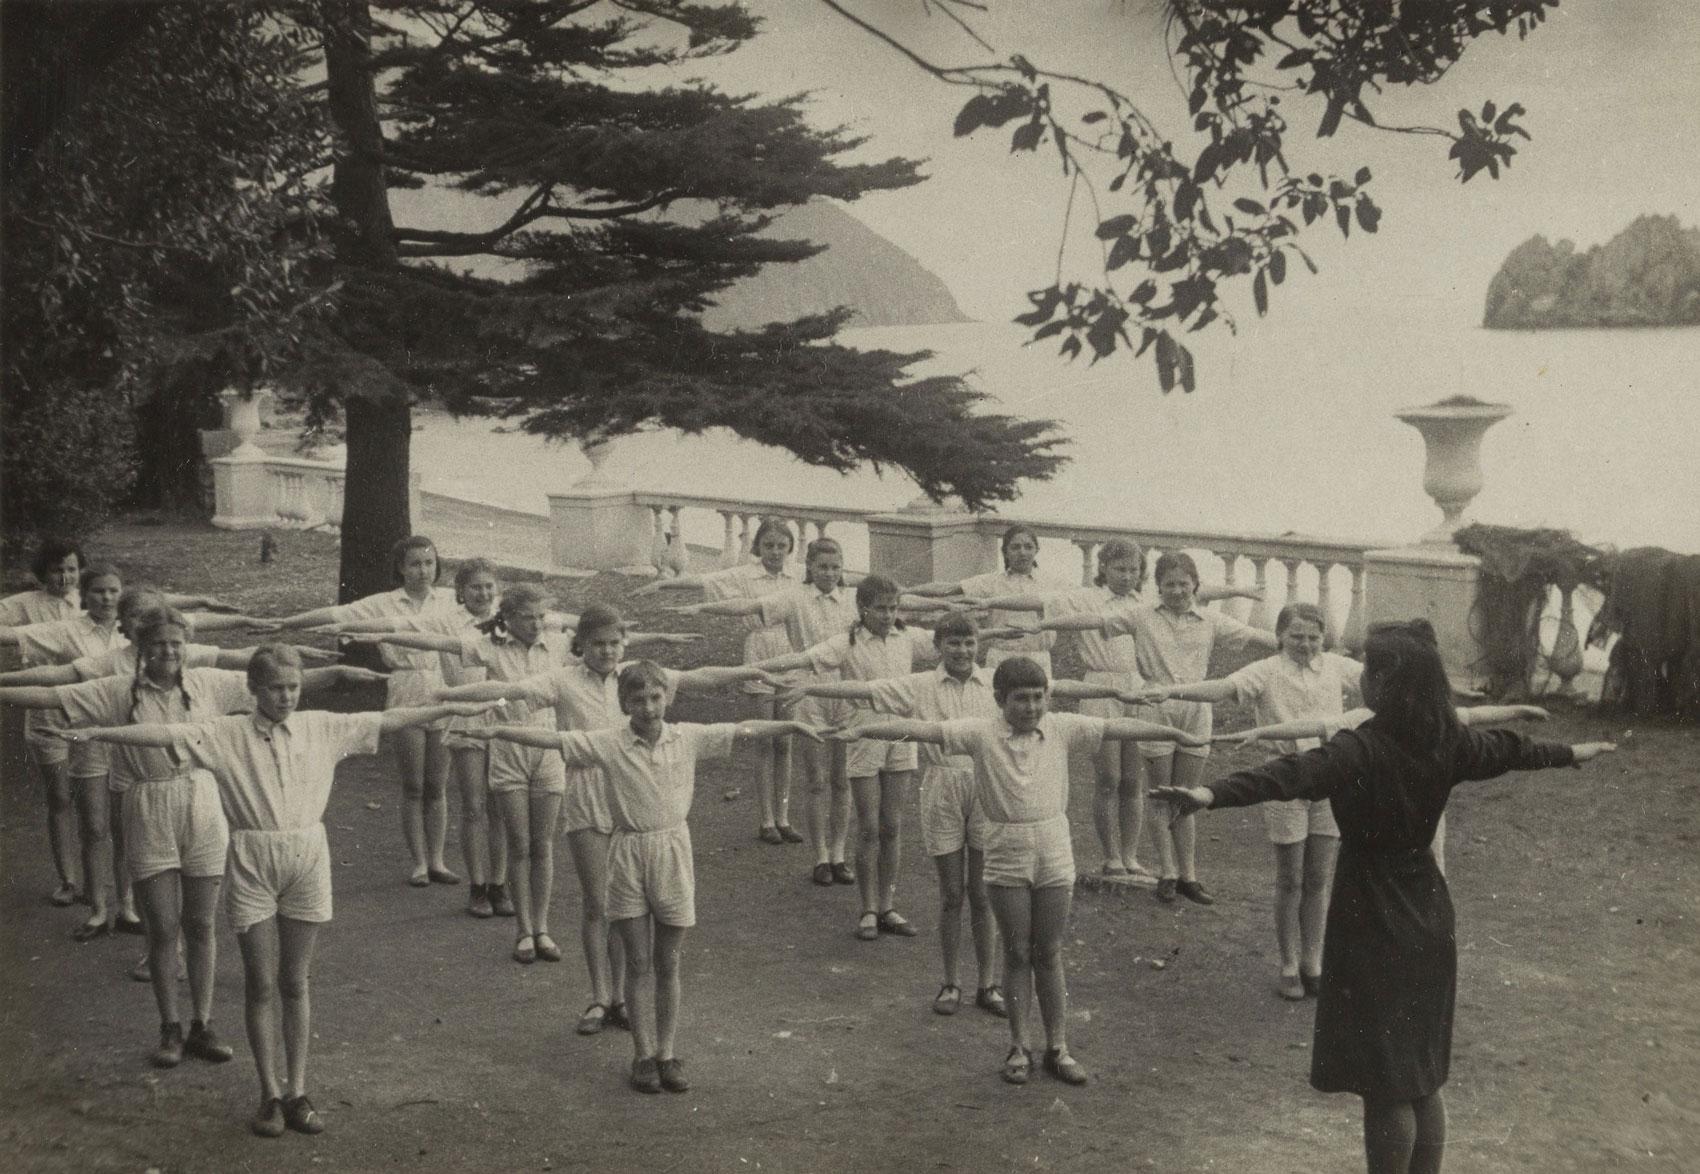 A group of children and instructor perform exercises at the Artek Pioneer Camp.